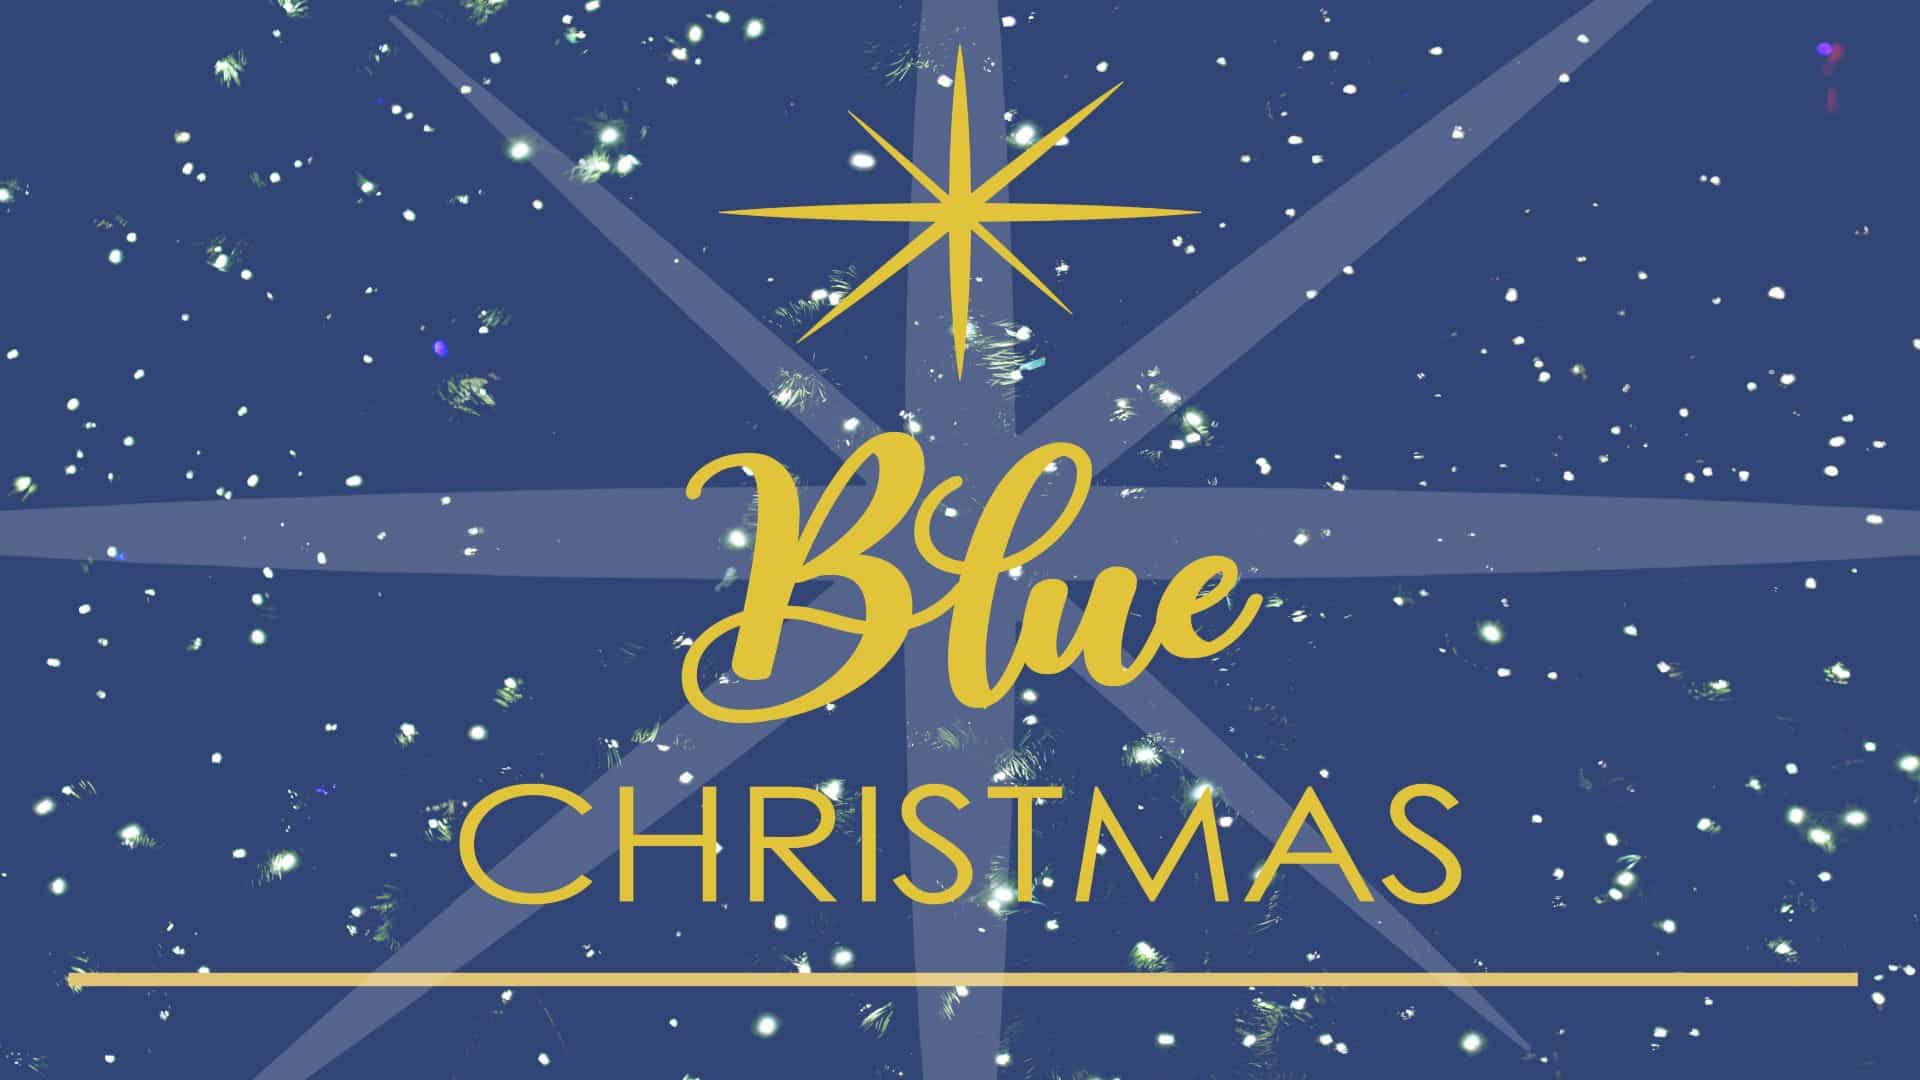 Blue background with yellow star and the words Blue Christmas